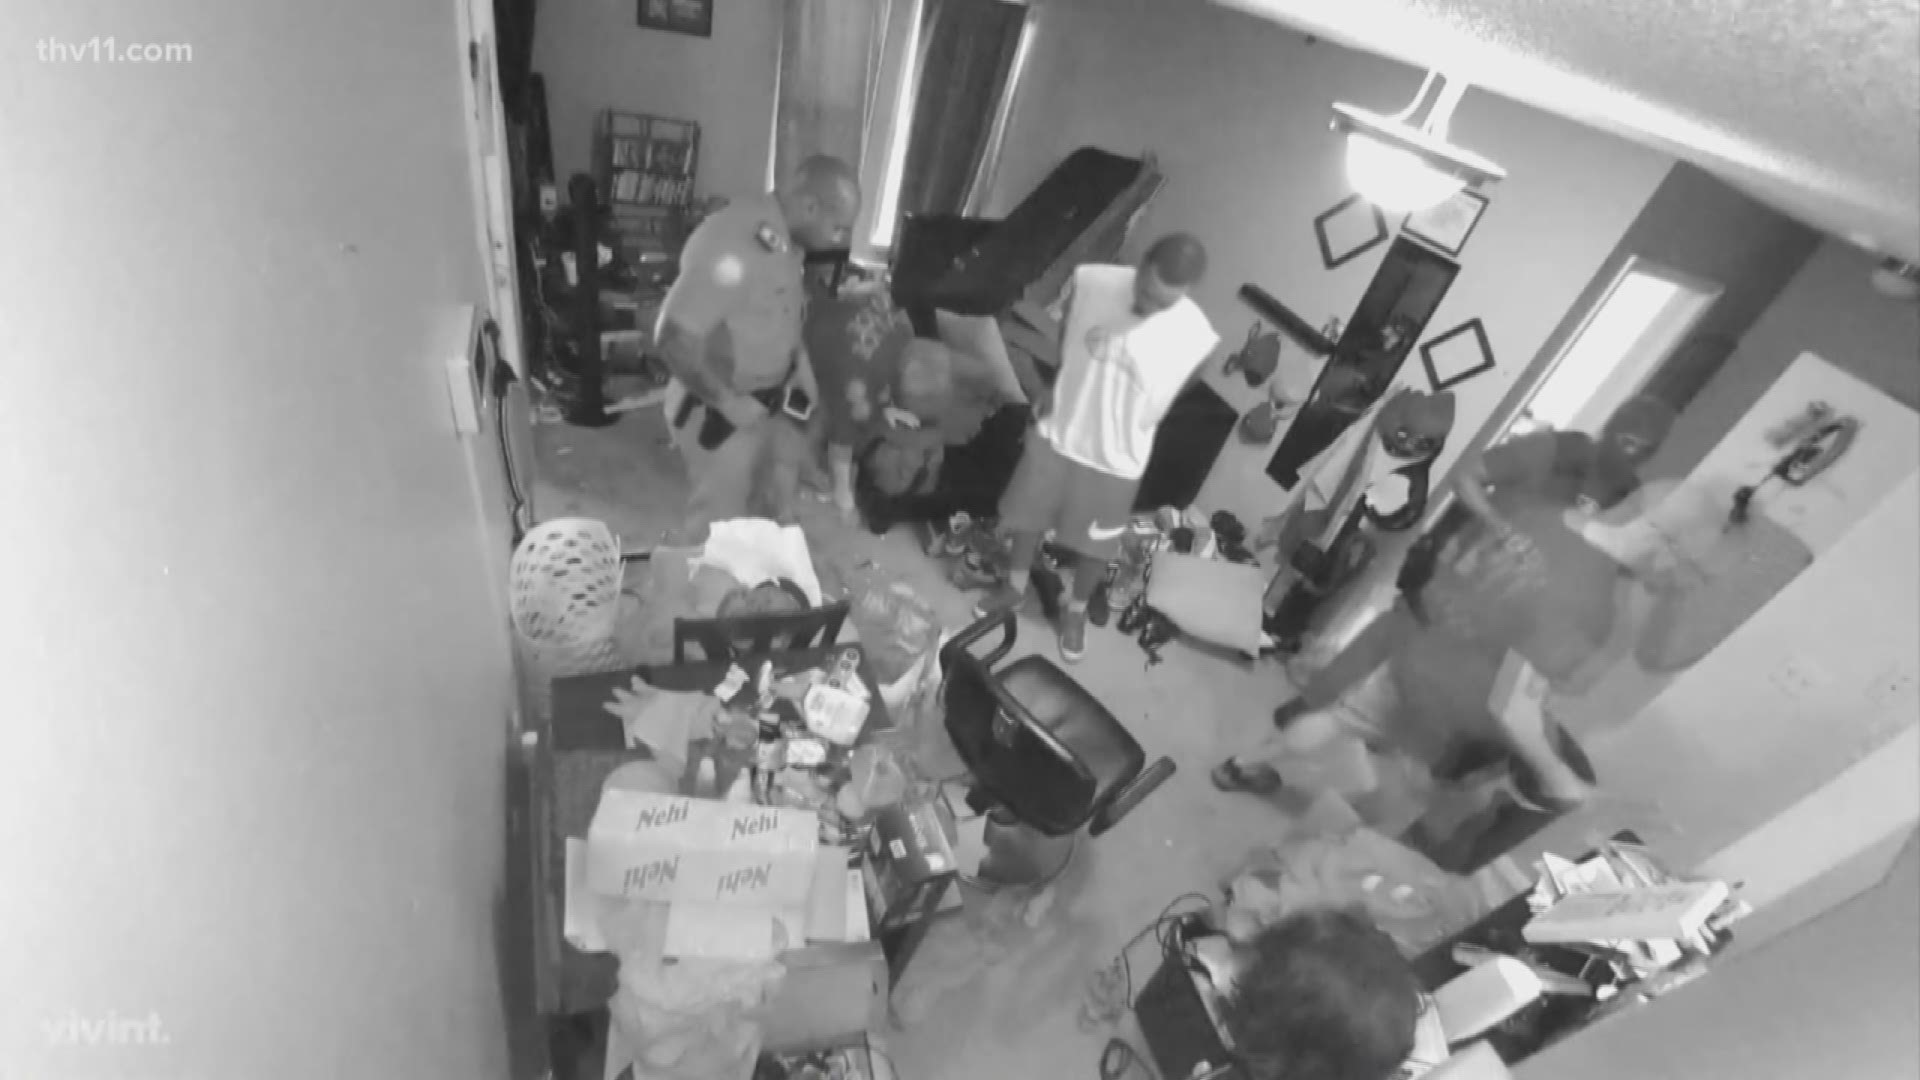 More people coming forward with video of little rock police's controversial 'no knock' warrants.